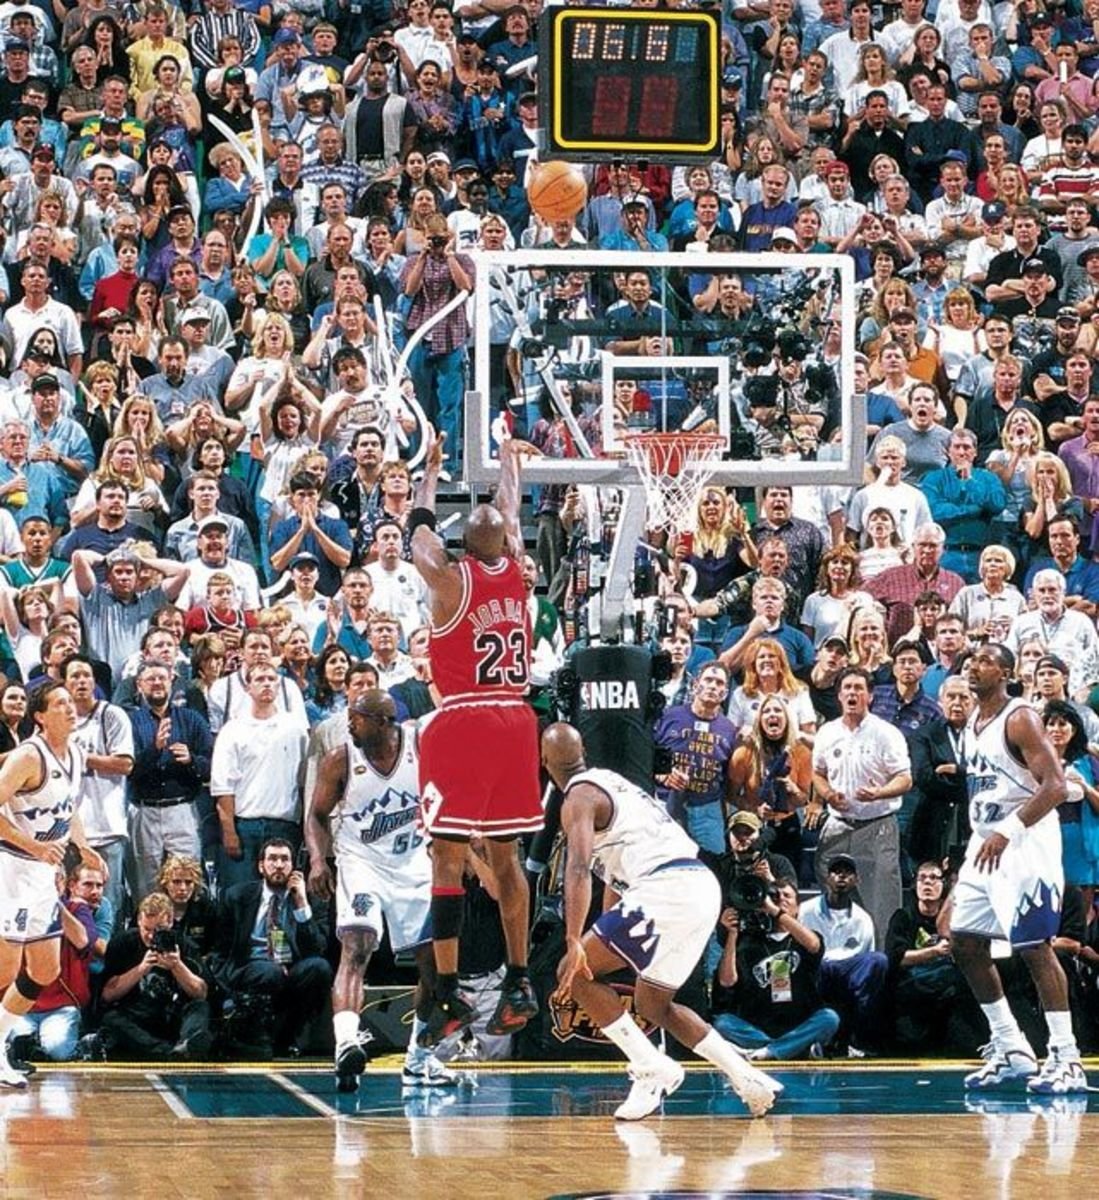 Quote with a more Iconic NBA playoff moment